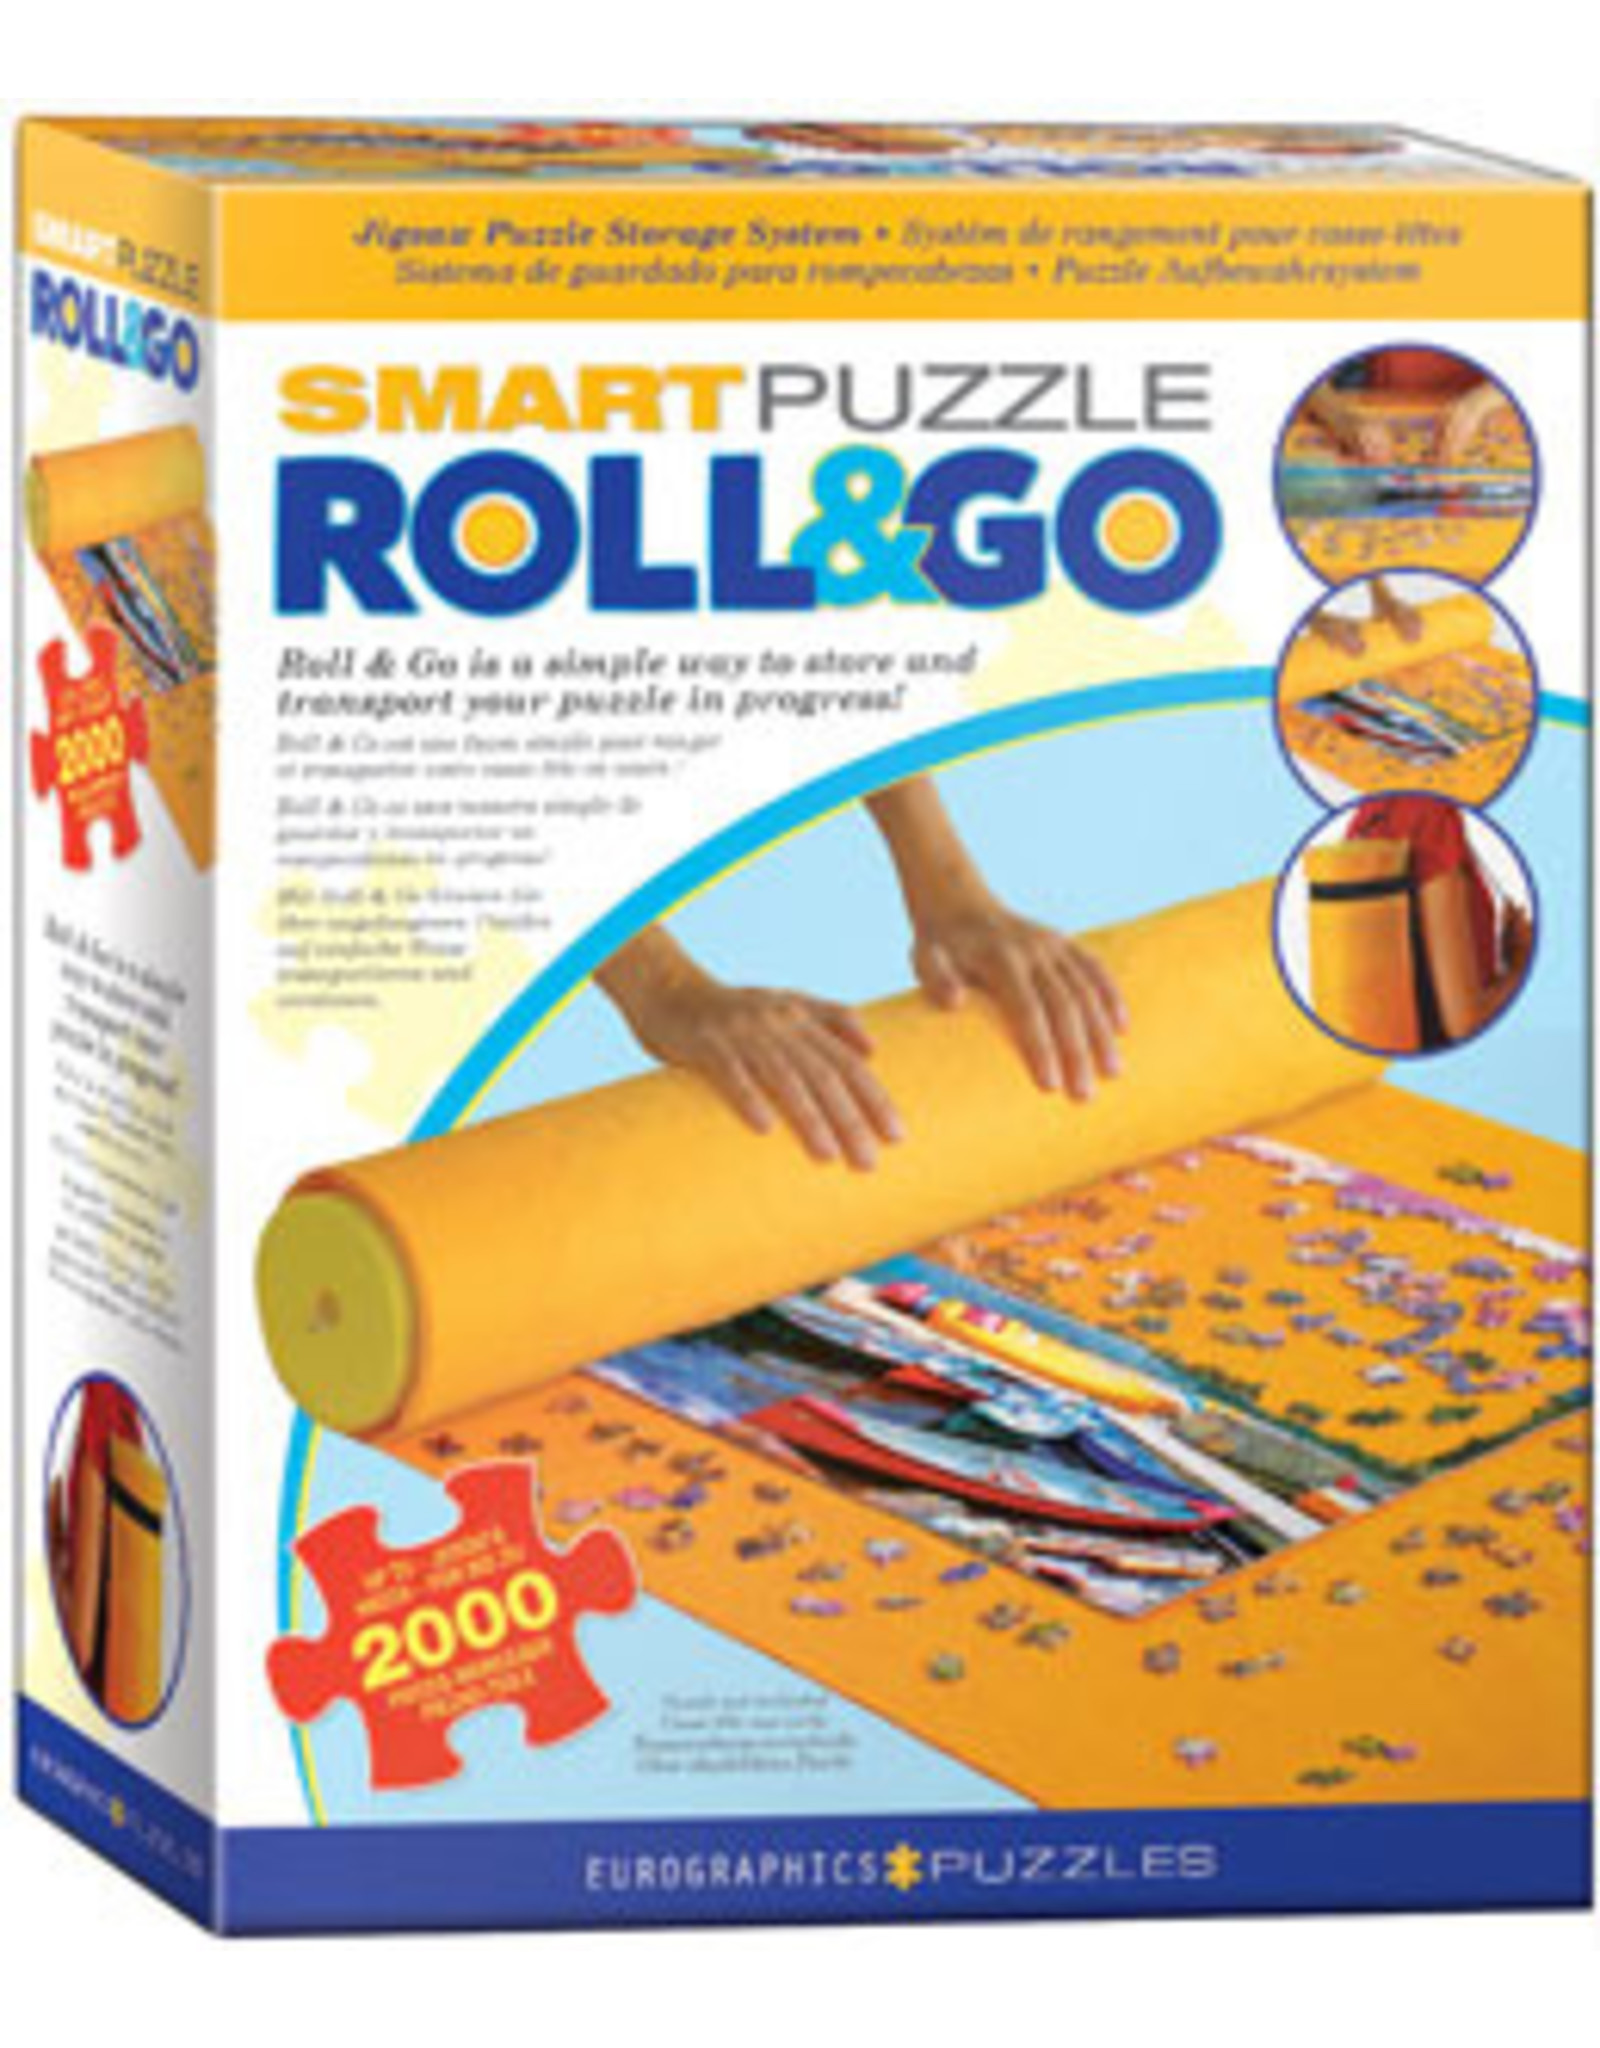 Eurographics Smart Puzzle Roll & Go